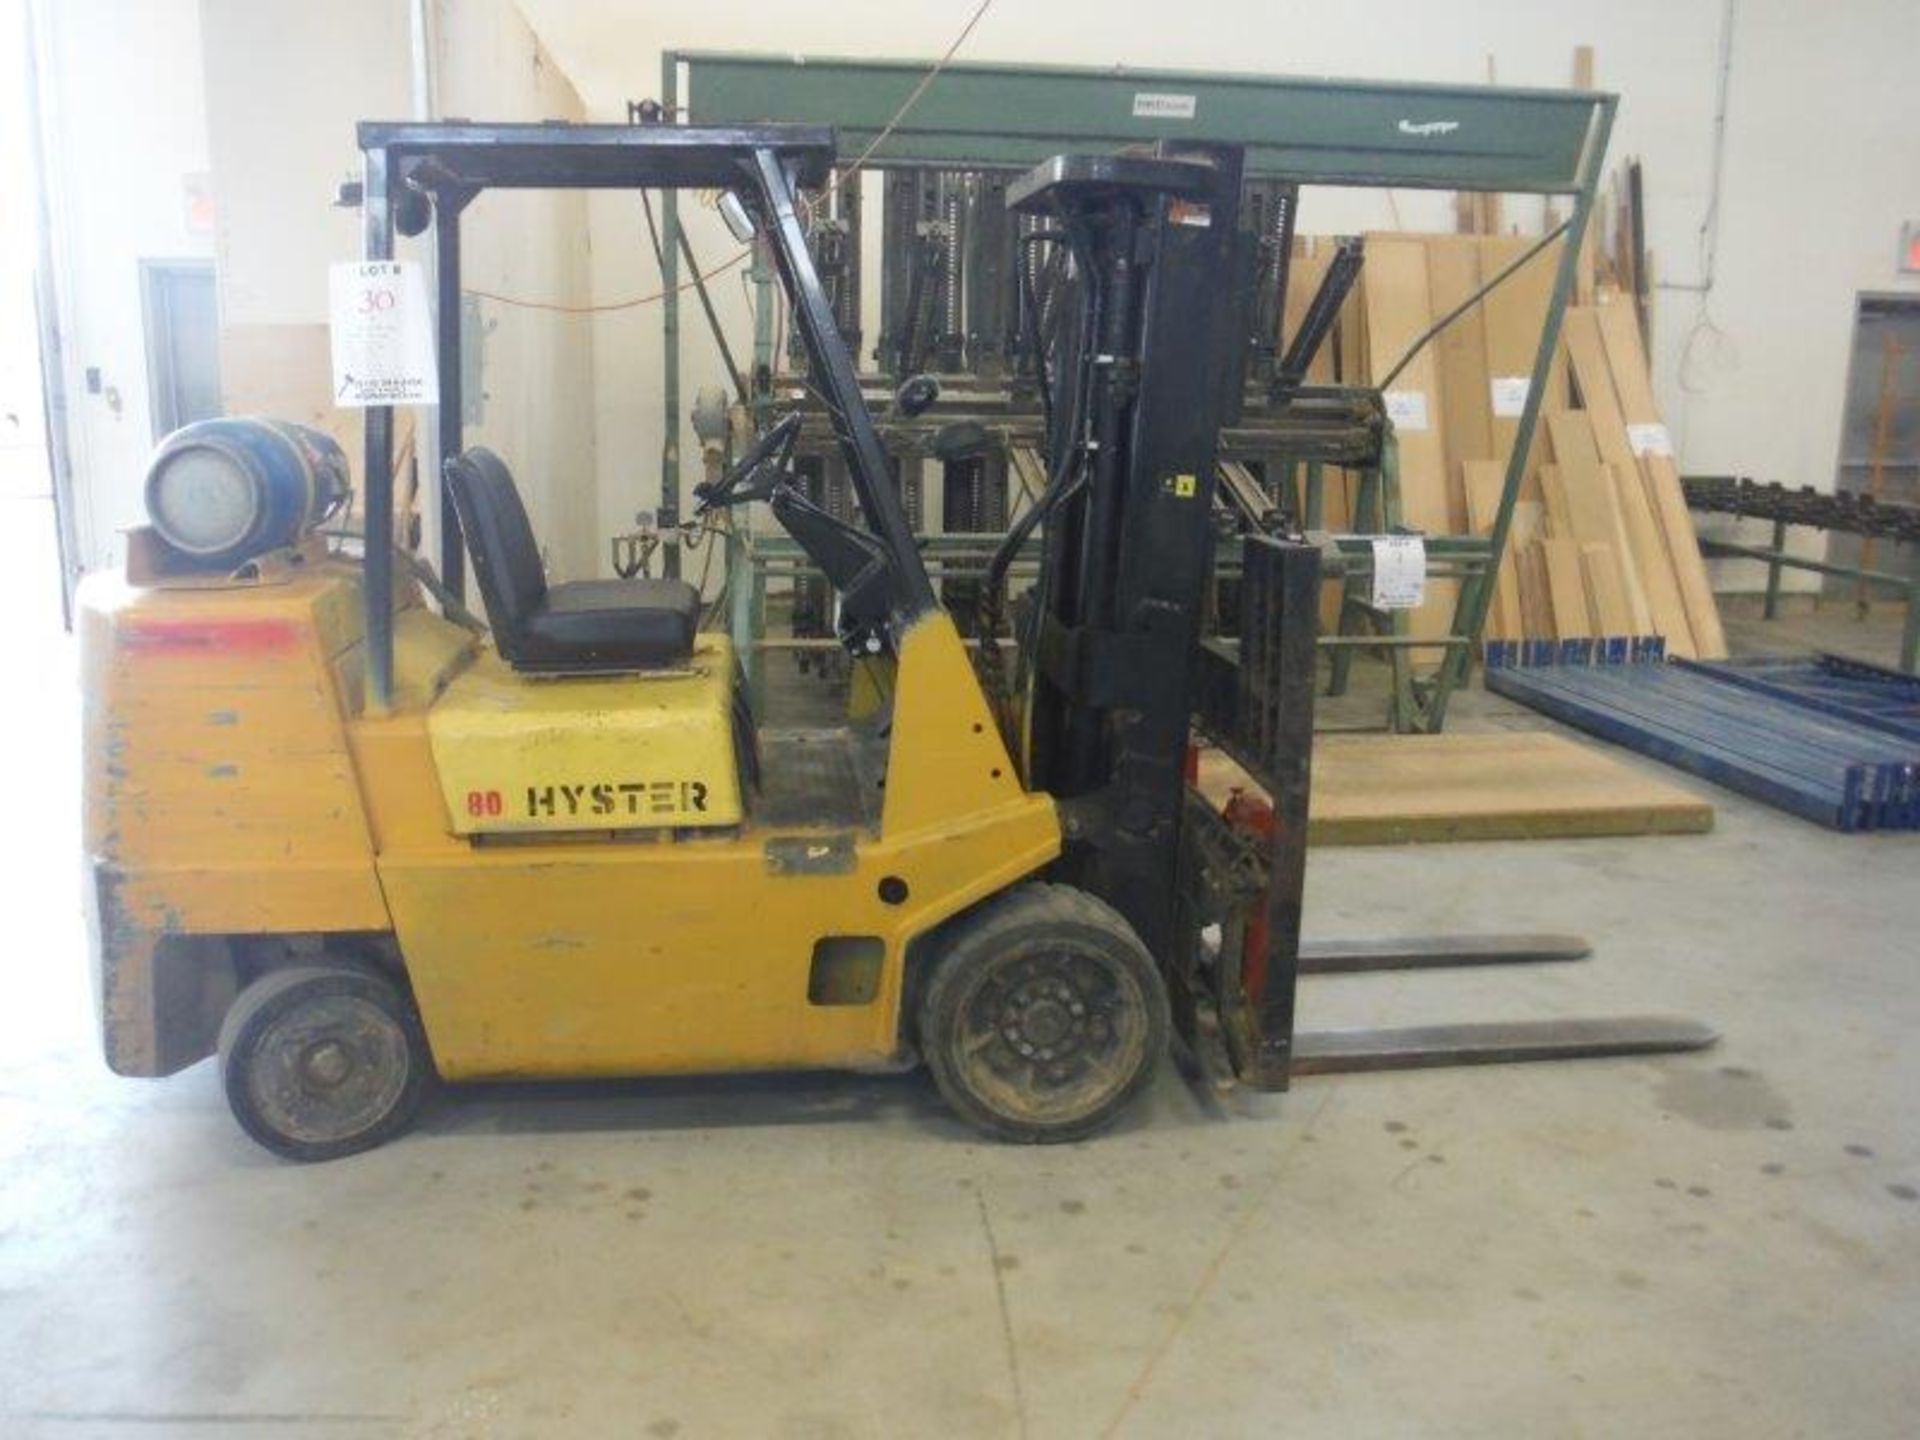 "HYSTER" PROPANE LIFT TRUCK, MODEL S-80 X L, cap: 8,000 lbs, 3-sections, side-shift, solid tires